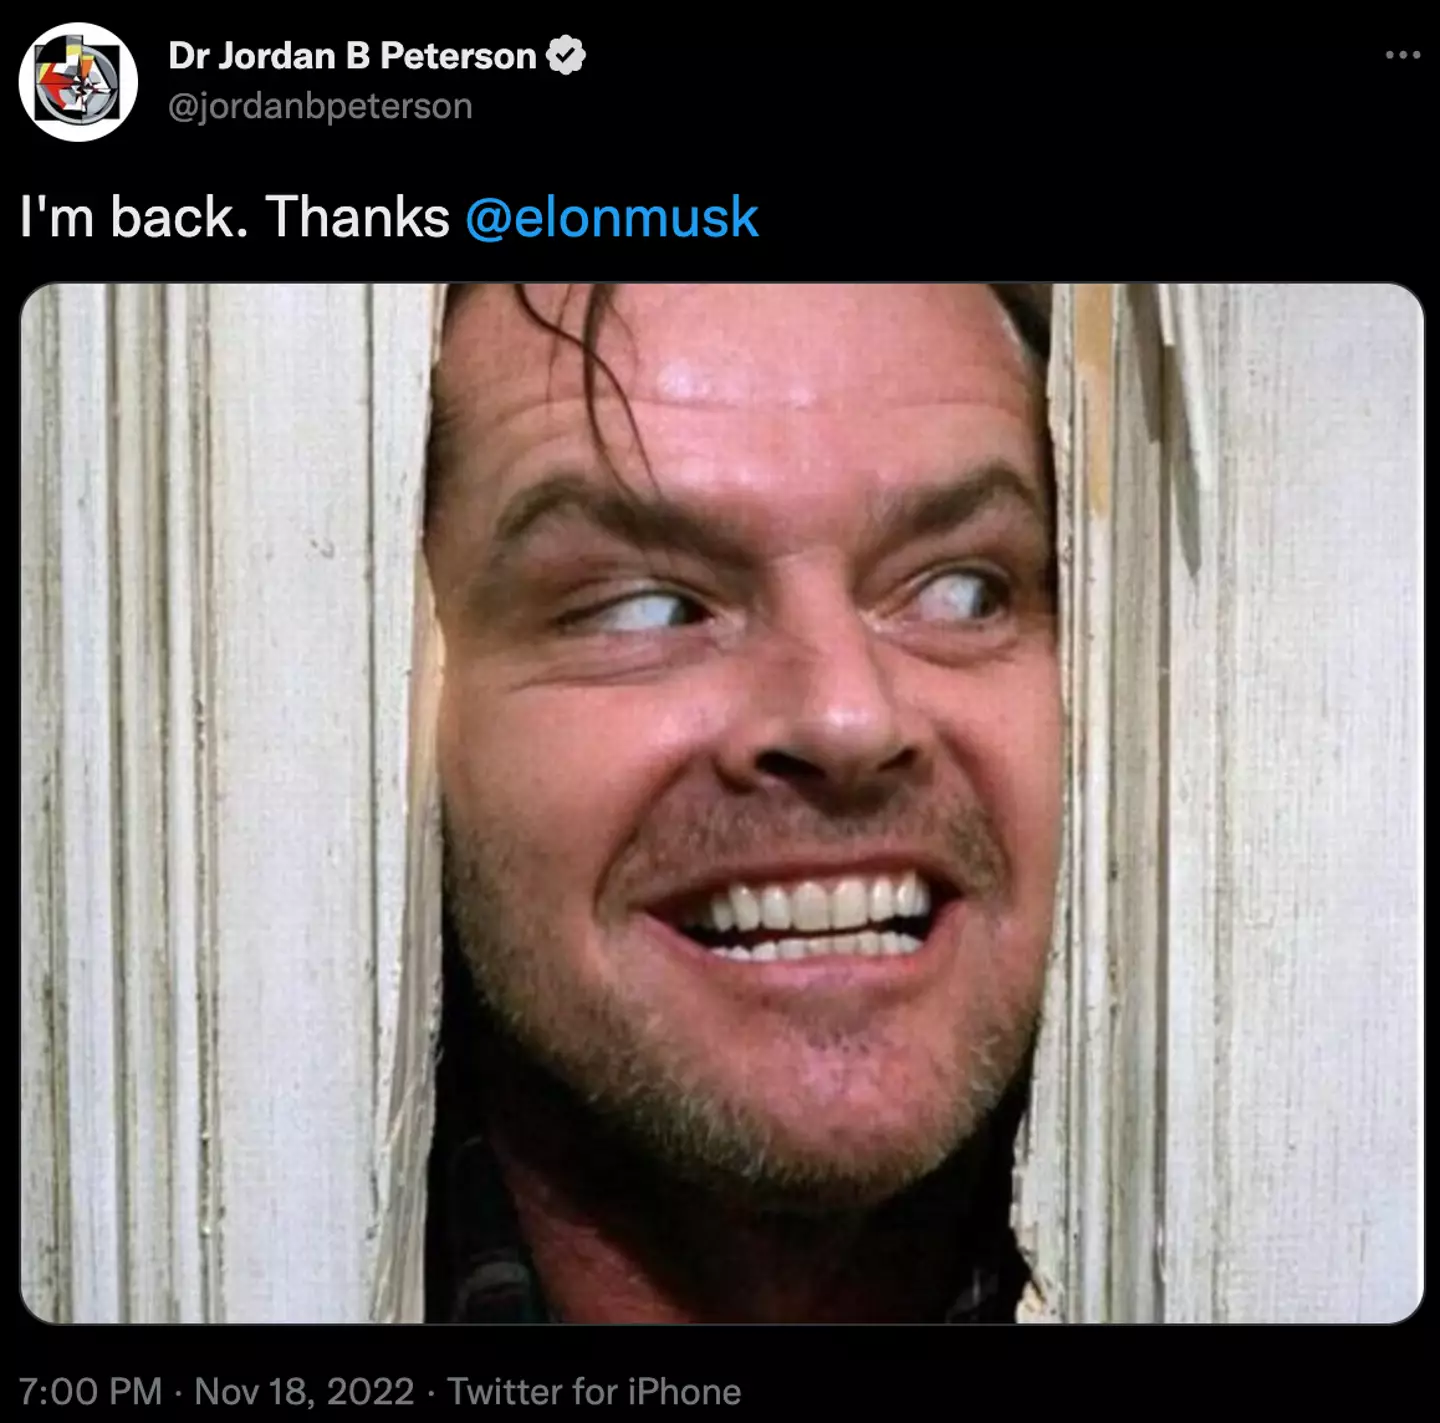 Jordan Peterson has publicly thanked Elon Musk after his Twitter account was reinstated on Friday.